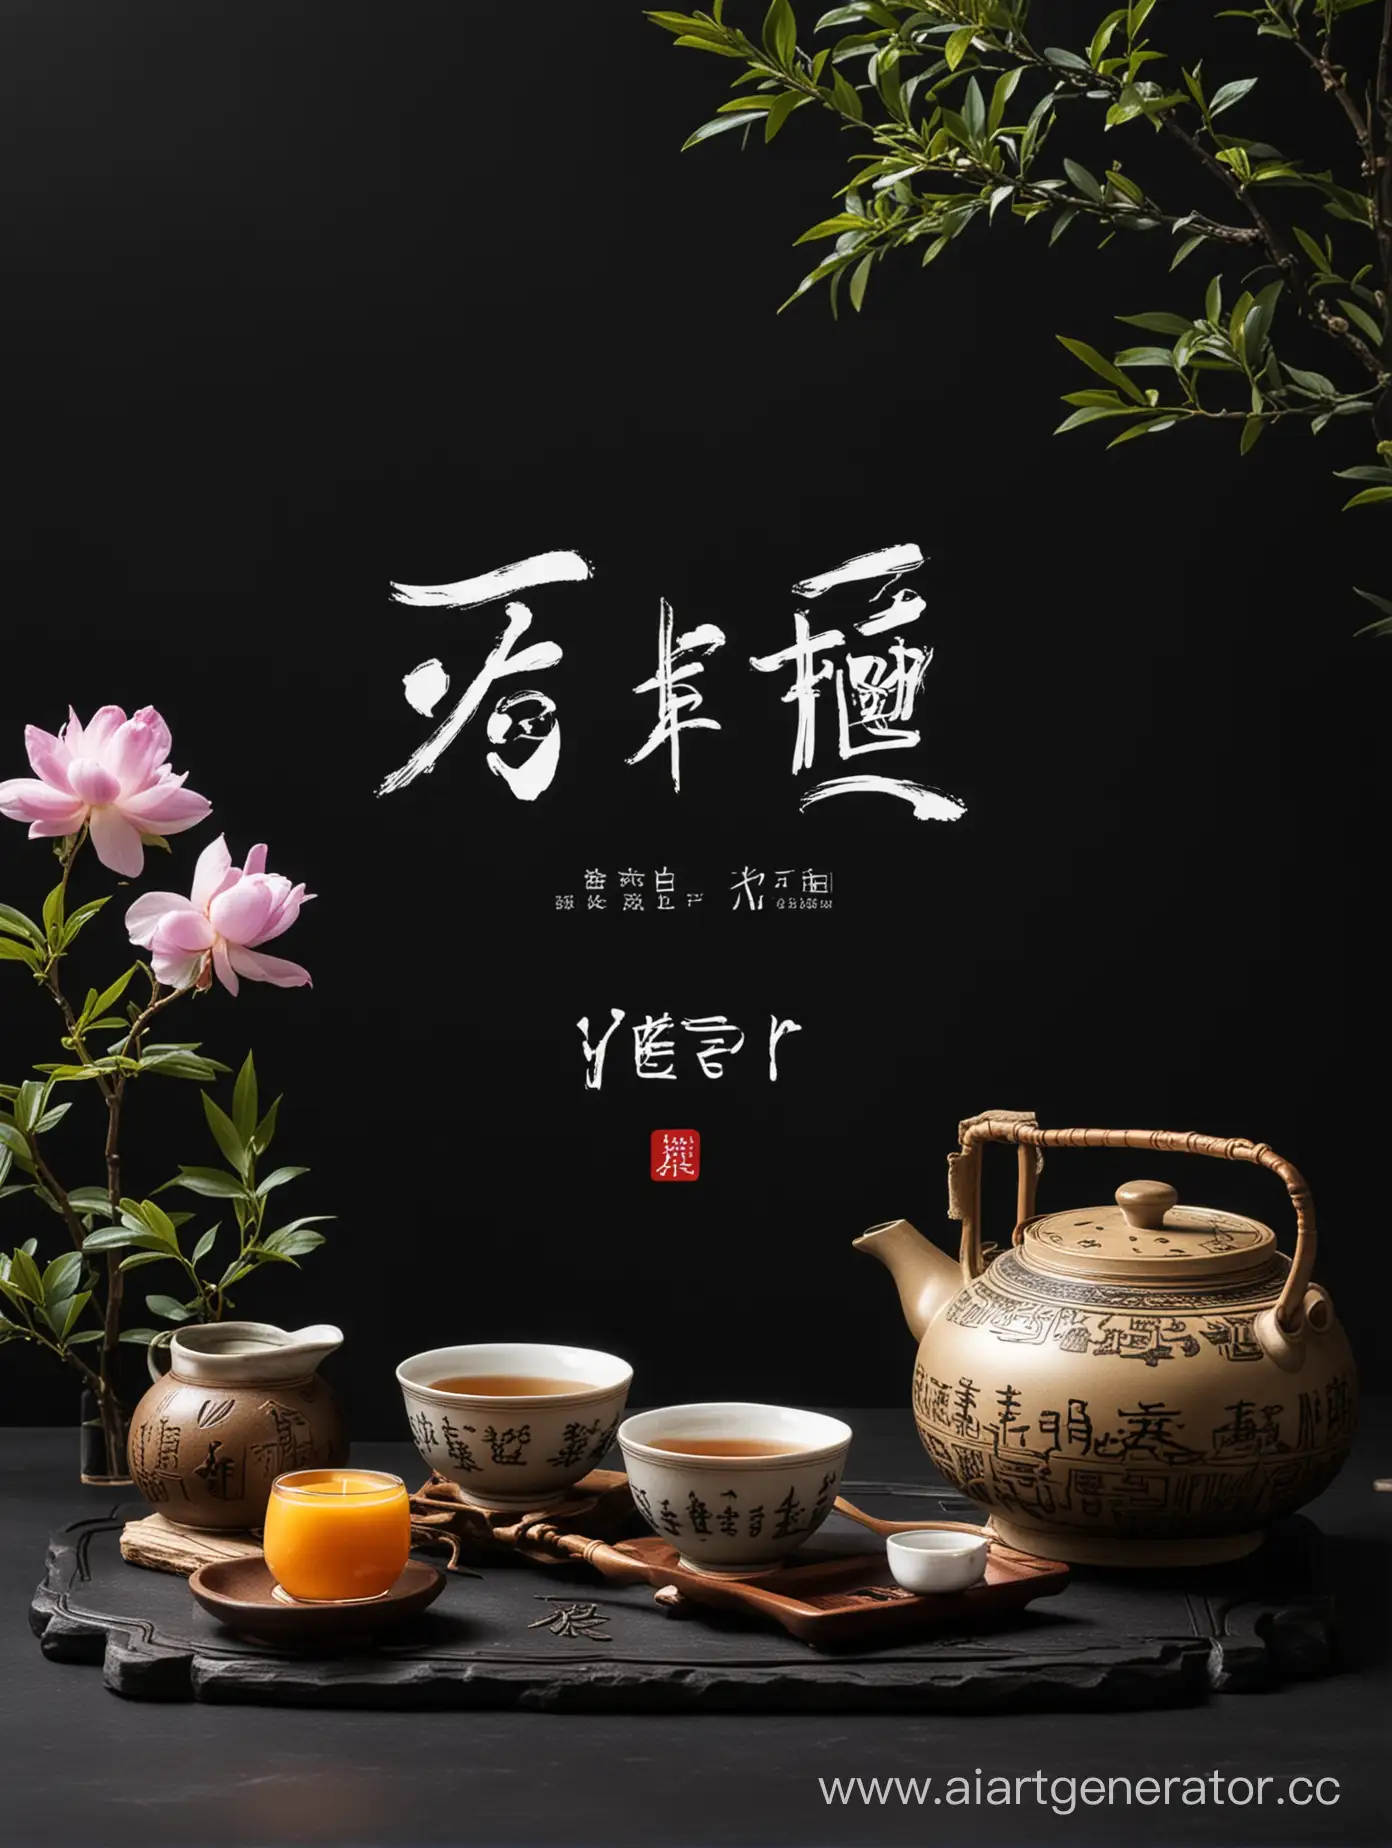 Chinese-Tea-Ceremony-with-Inscription-YETER-on-Black-Background